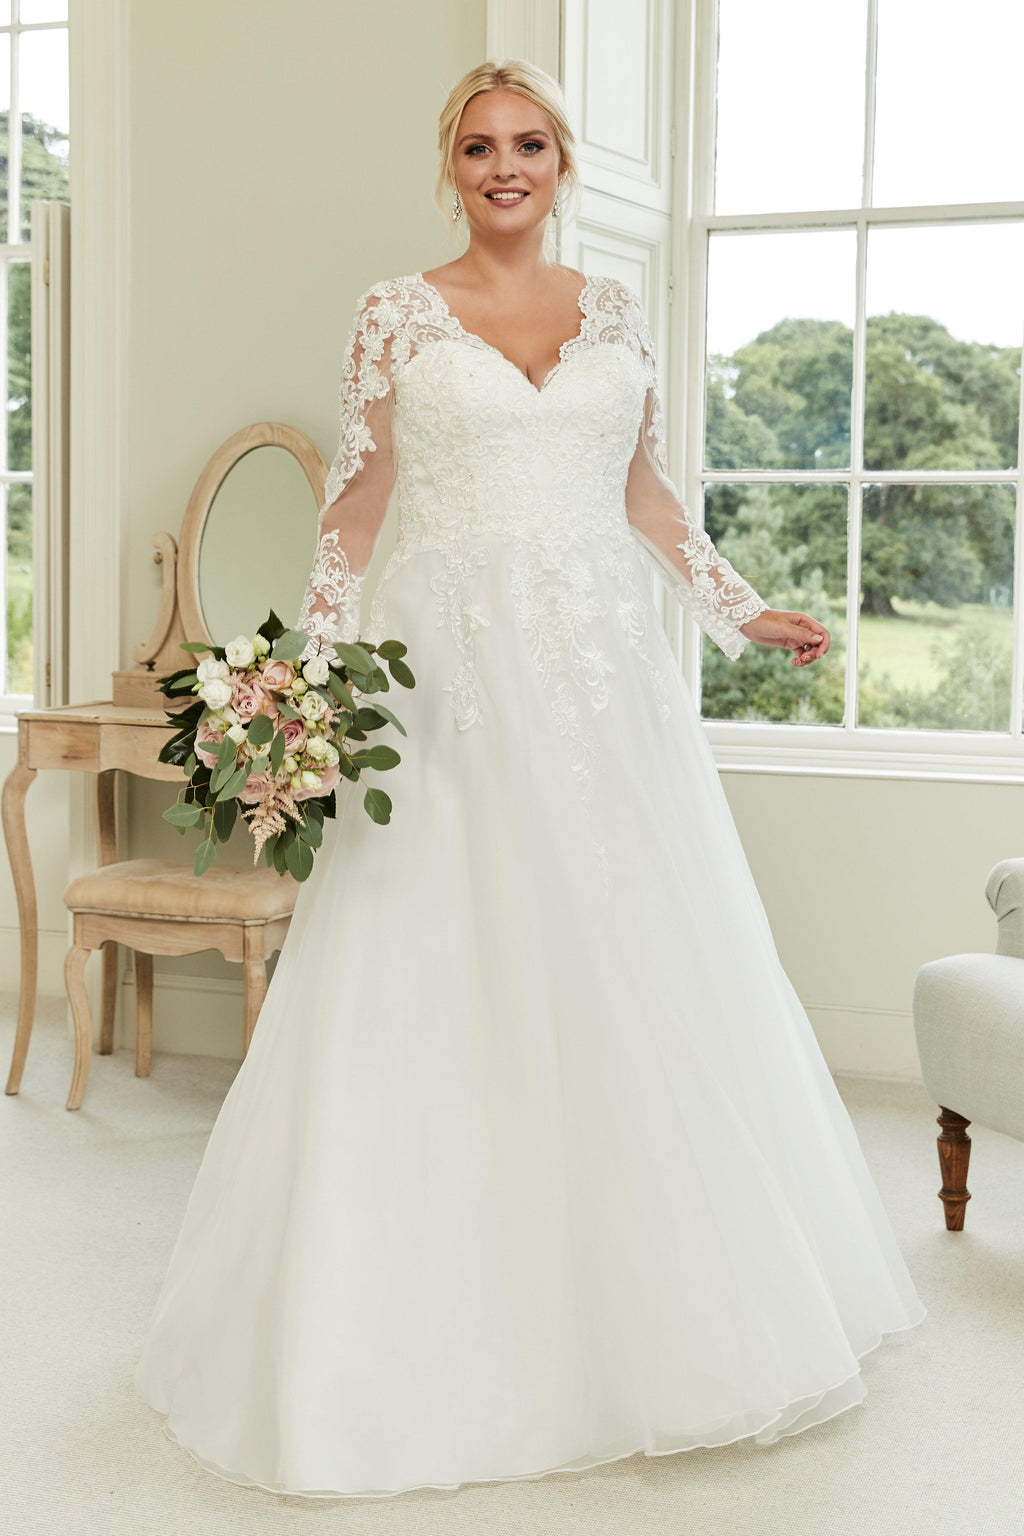 UK26 LaceyMae - Adore Bridal and Occasion Wear